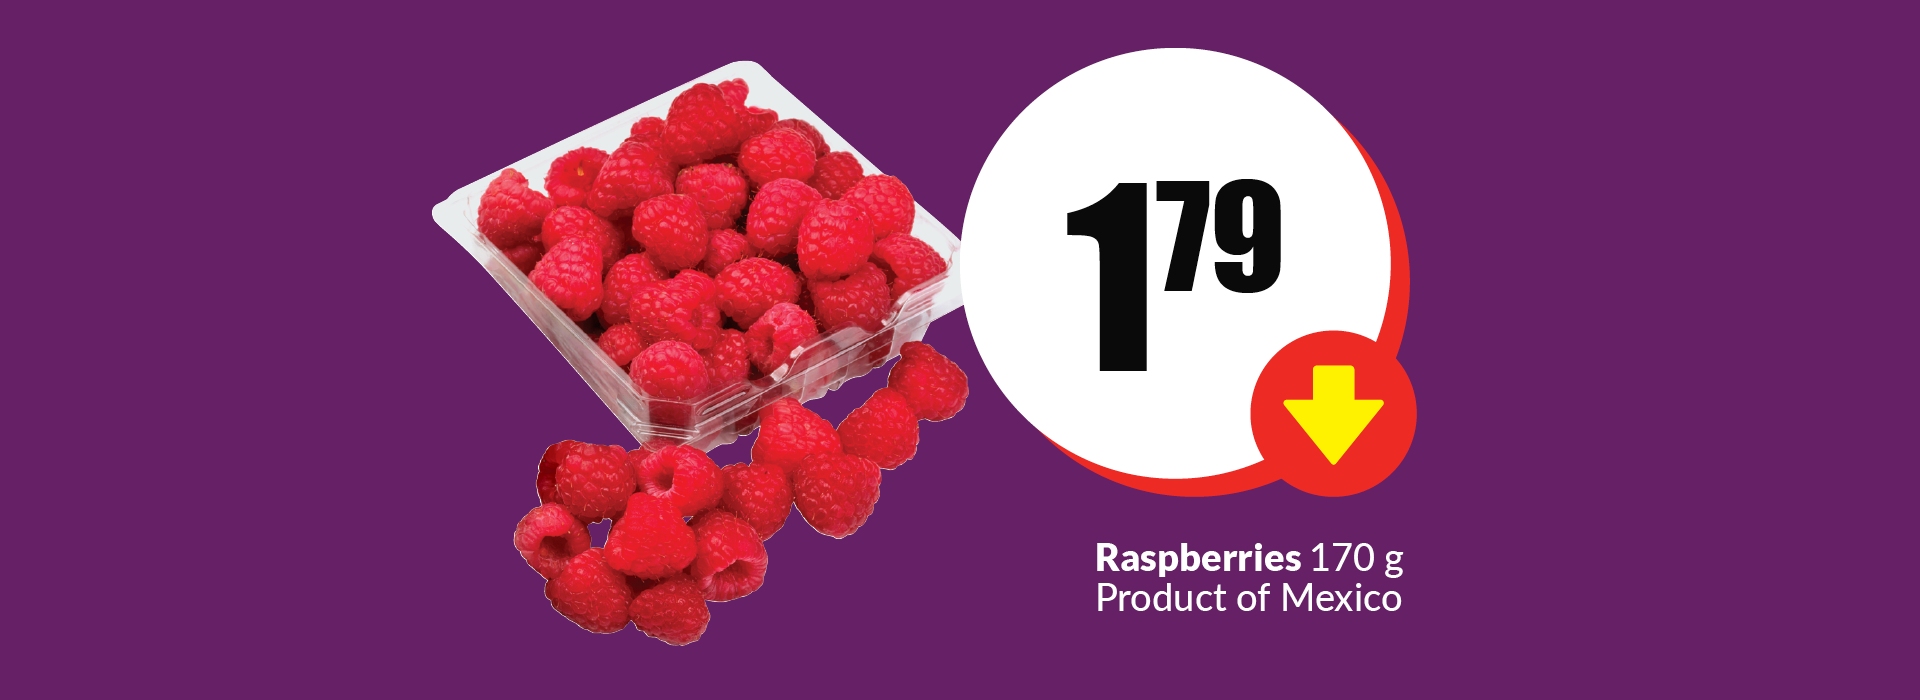 The following image contains the text "Raspberry 170 g Product of Mexico. Get them at just $1.79."